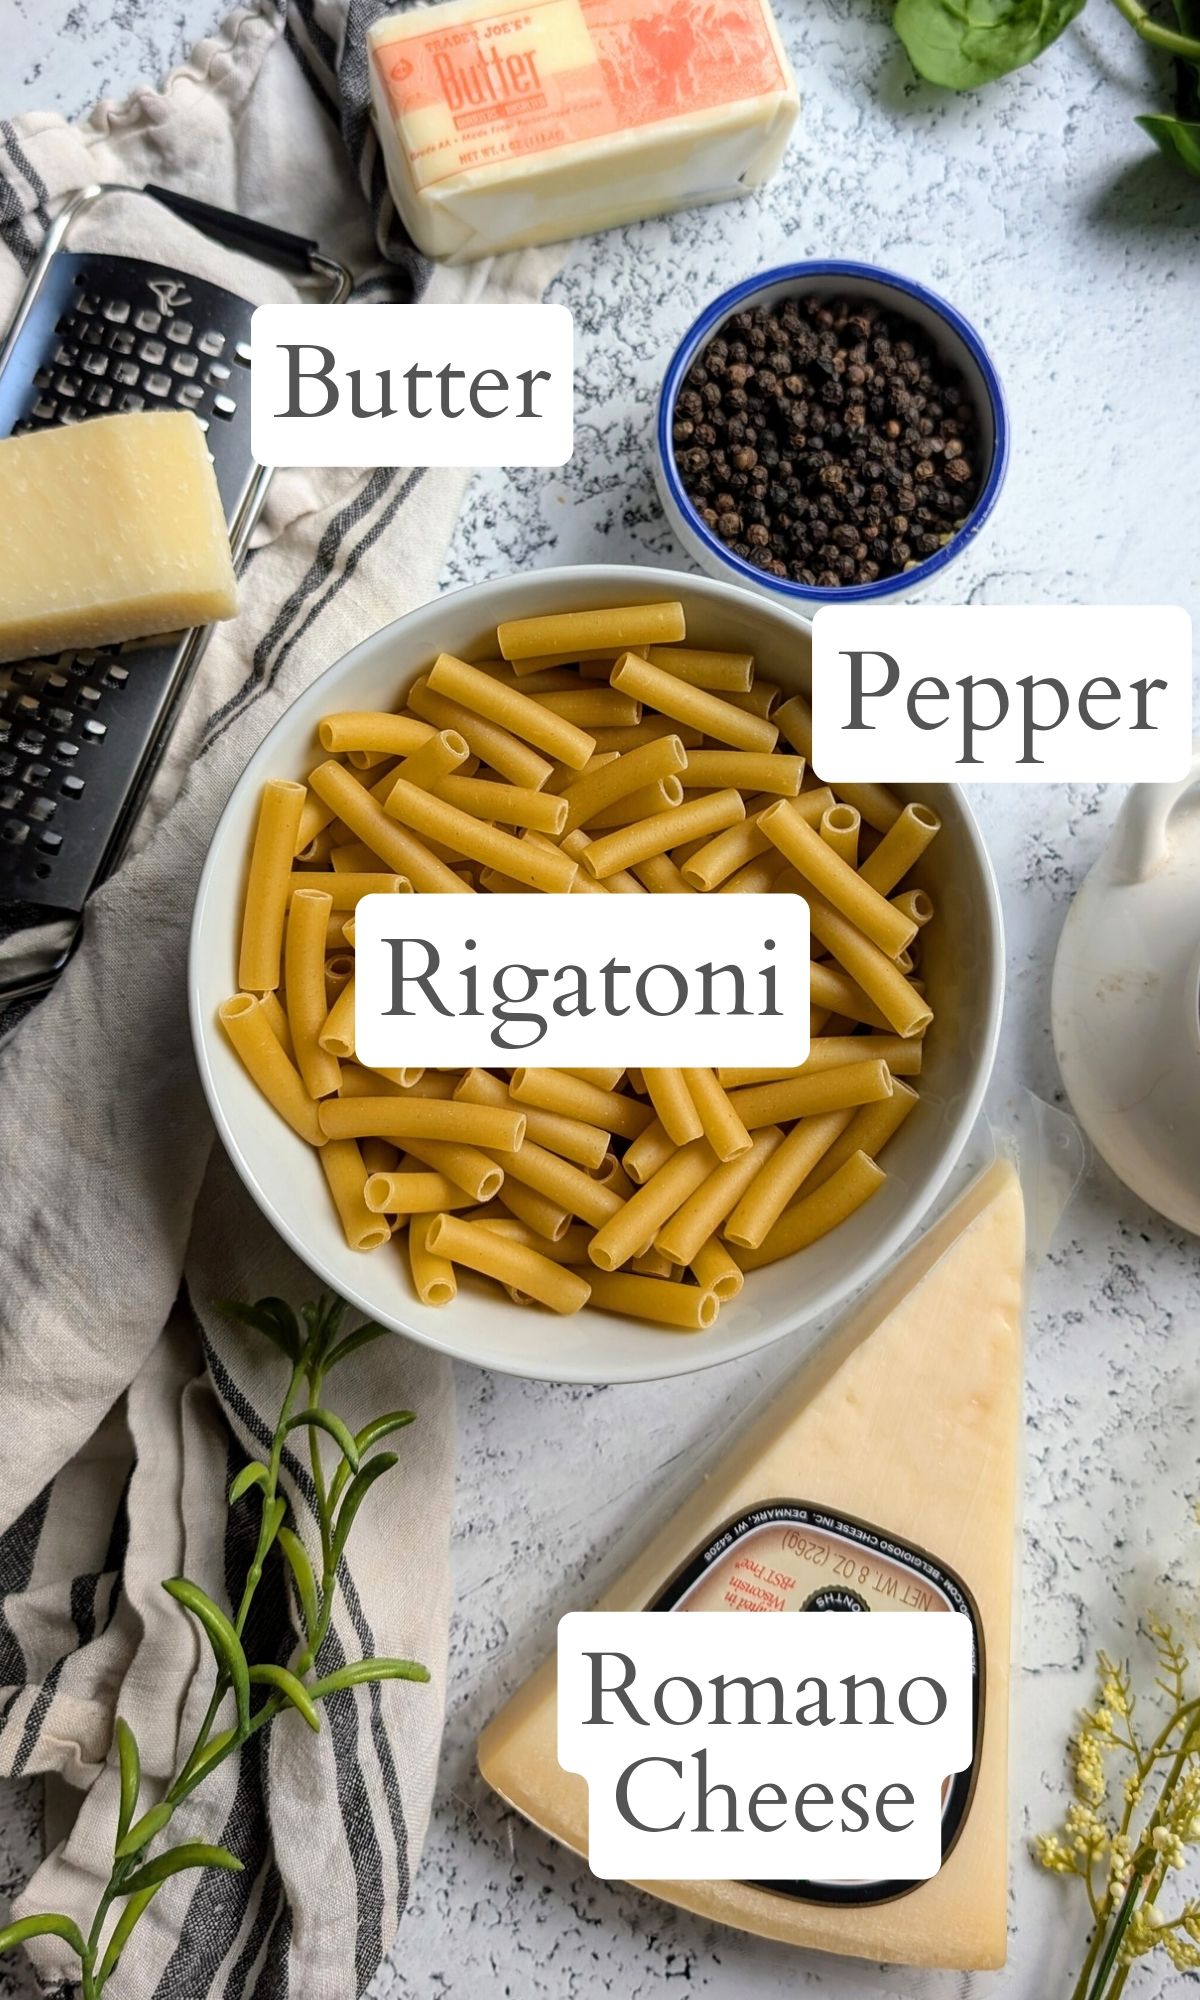 ingredients for cacio e pepe with rigatoni noodles, black pepper, romano cheese, and butter.